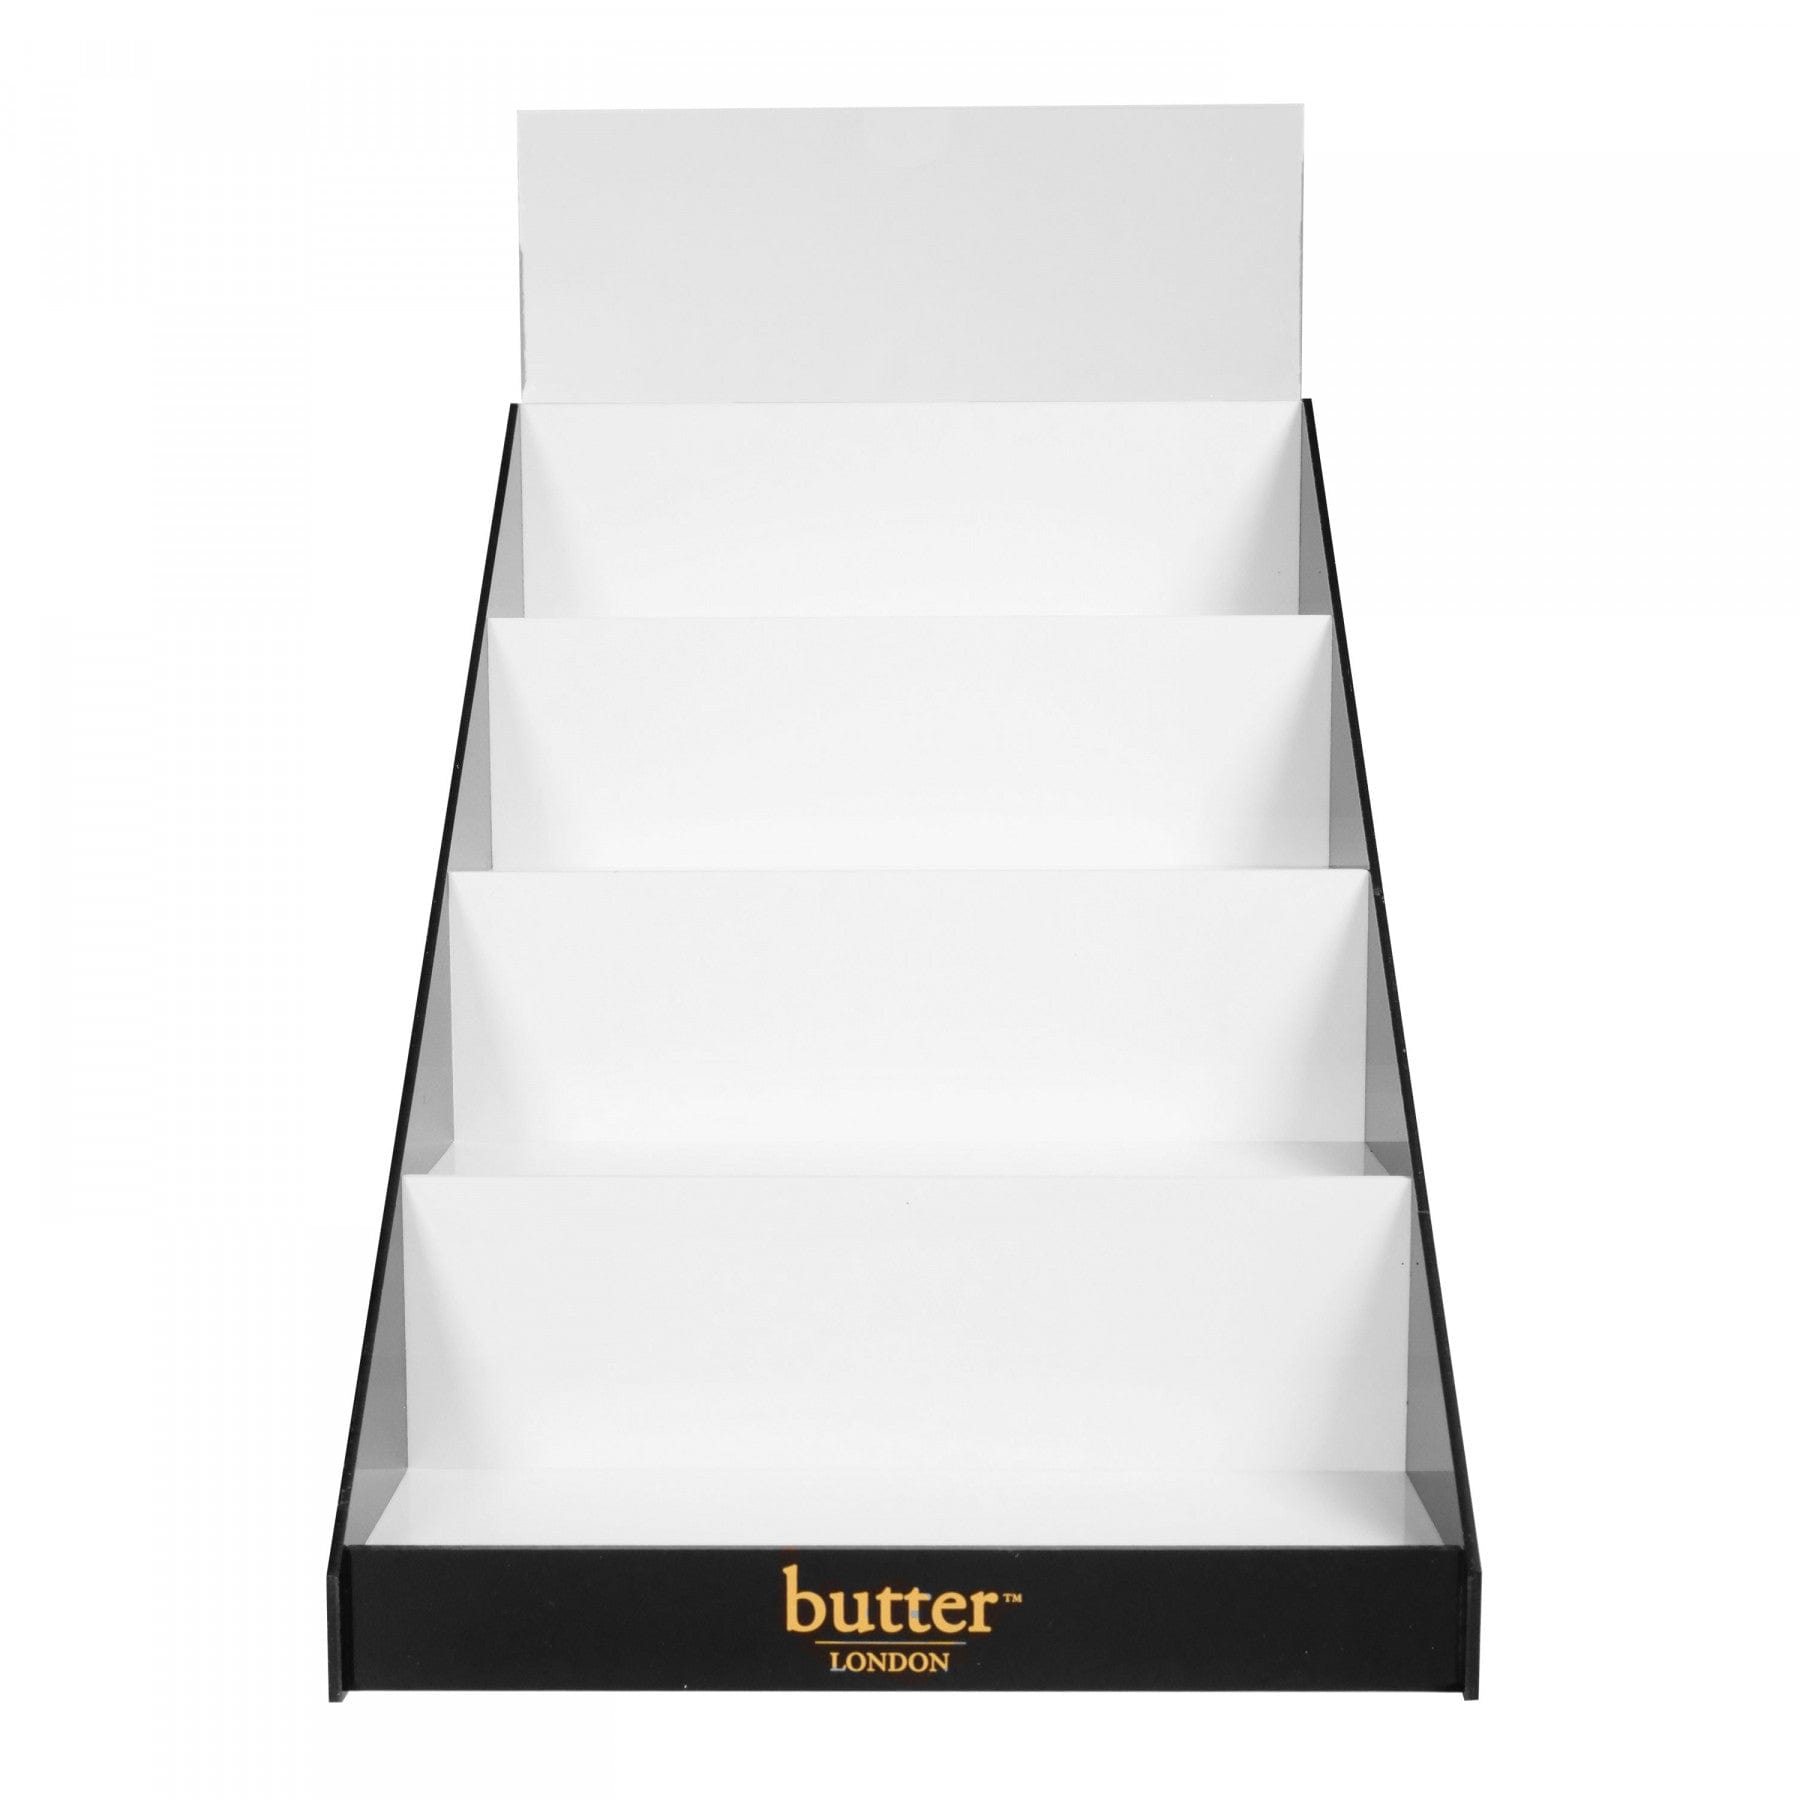 Stair Step Unit - Fits 60 butter LONDON Polishes NAILS - BUTTER LONDON - Luxe Pacifique